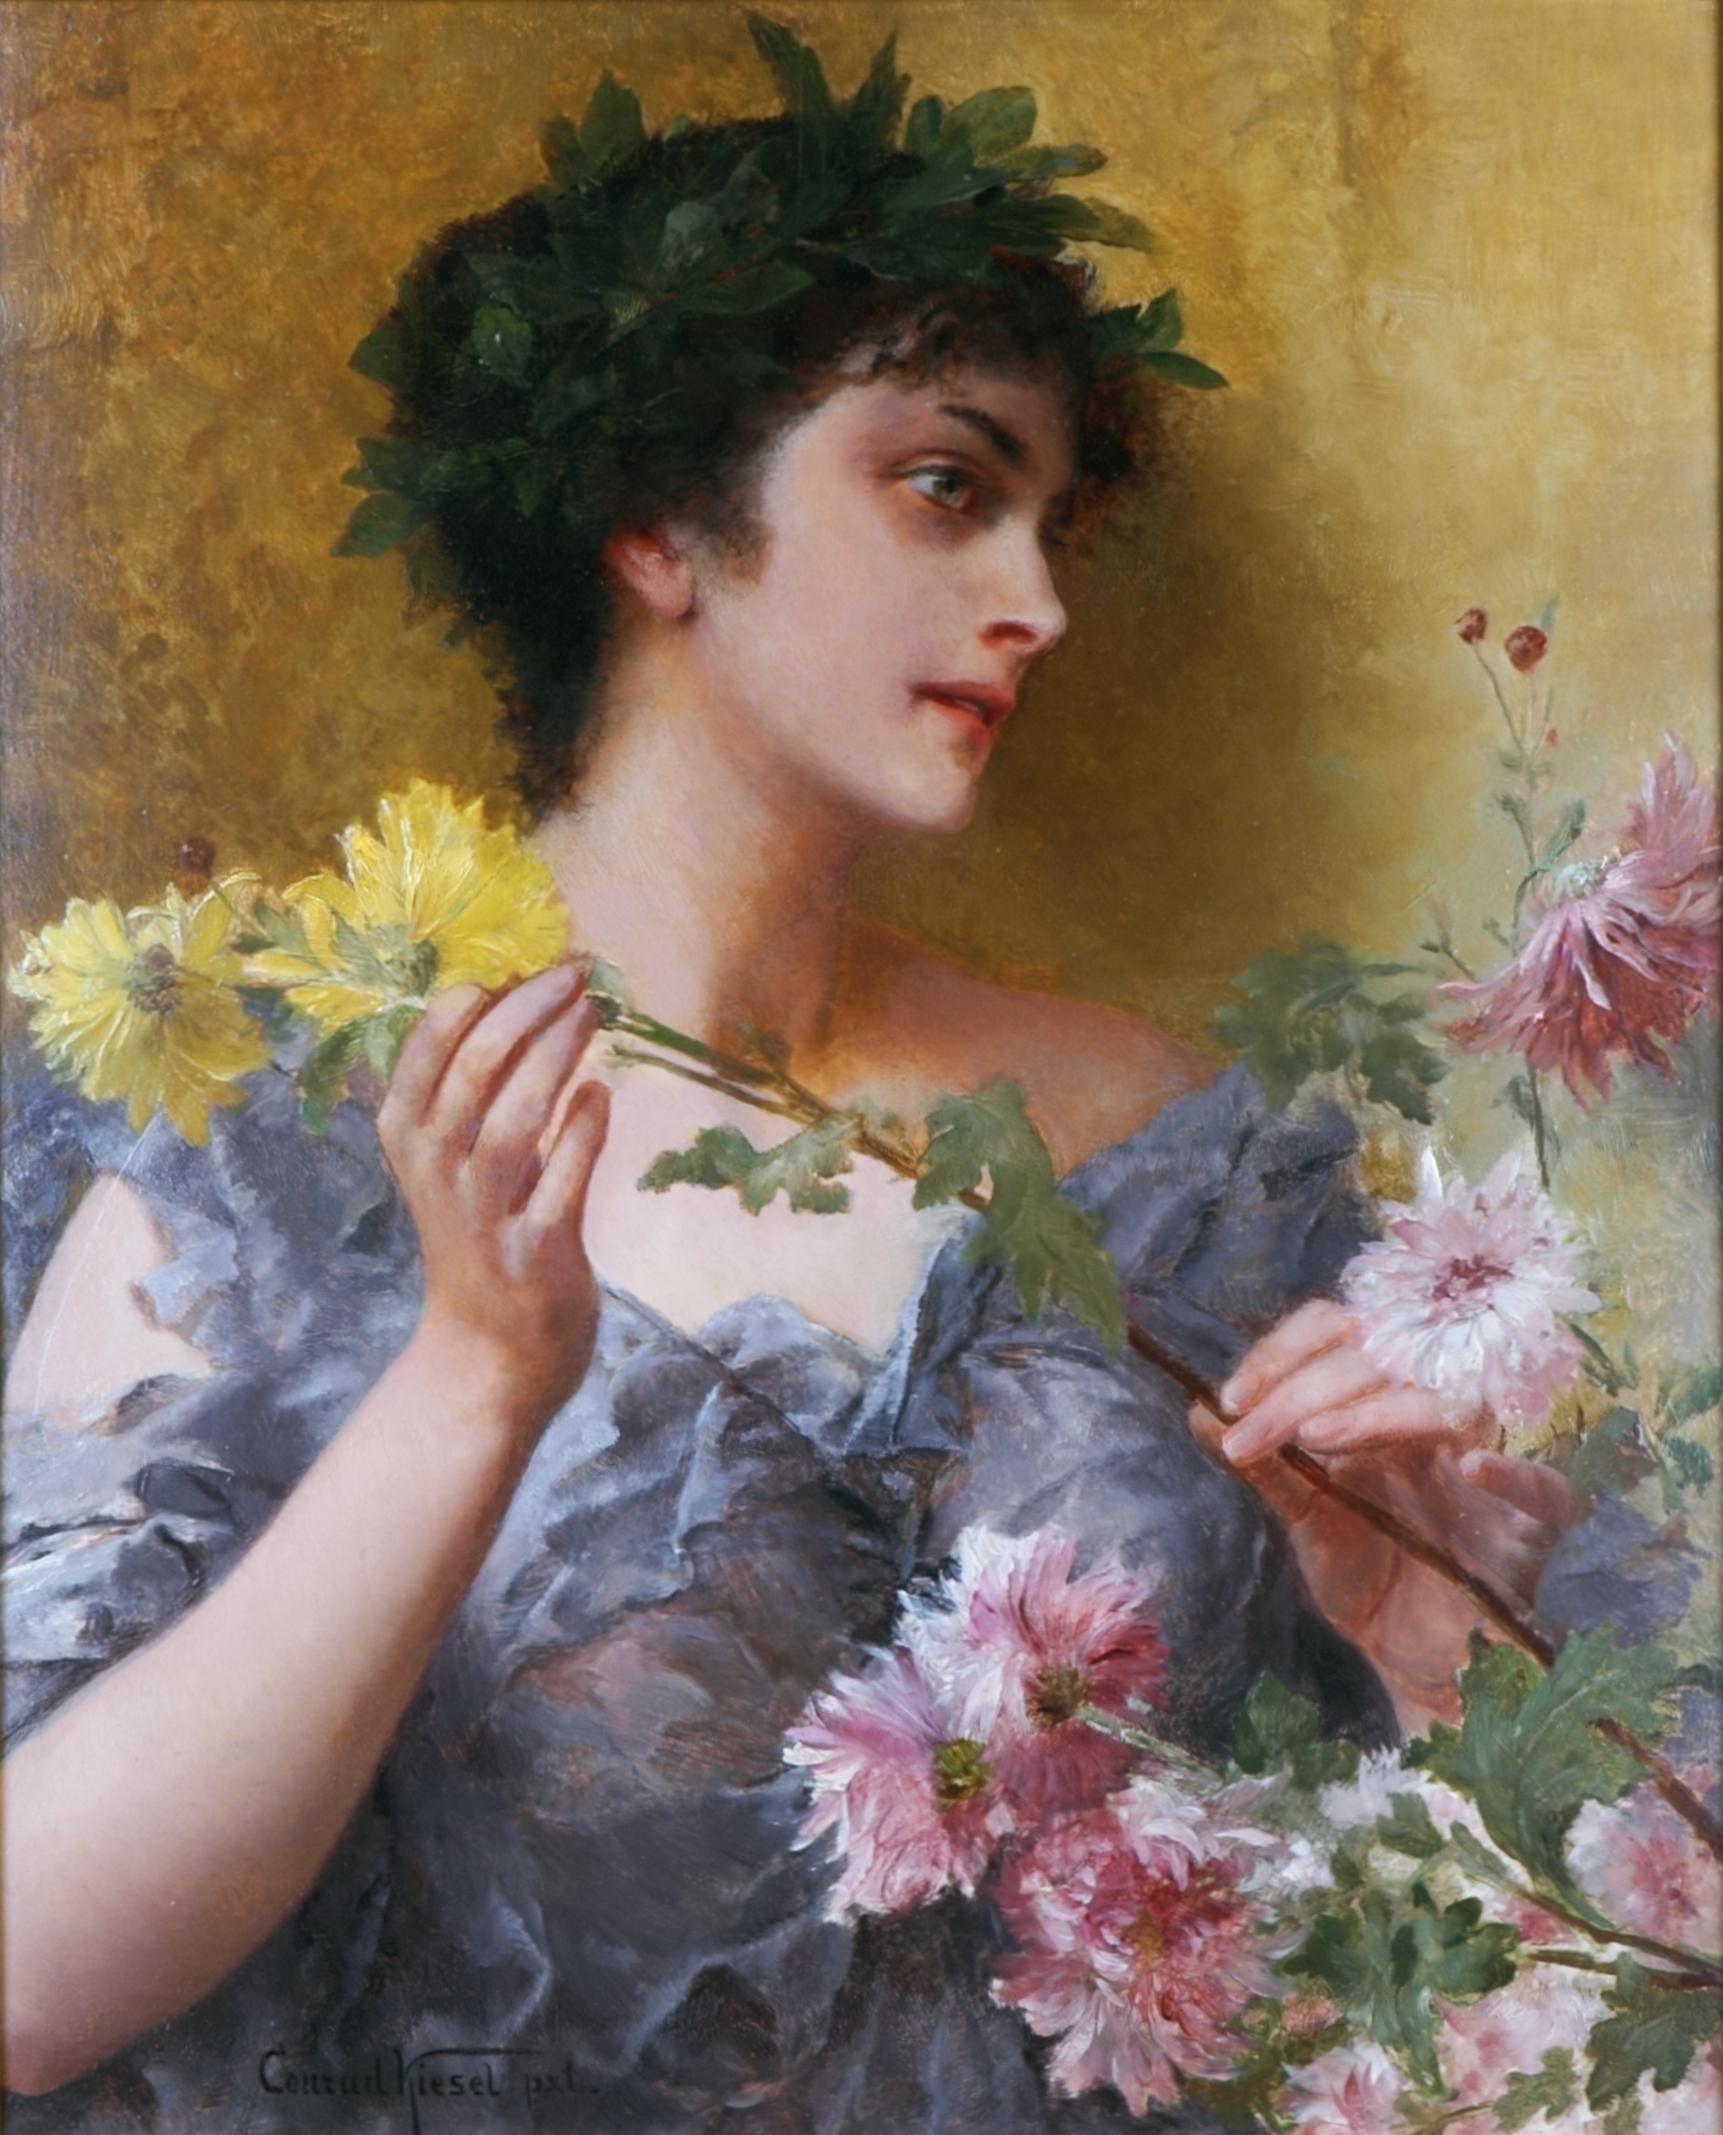 Conrad Kiesel Nude Painting - The gift of flowers